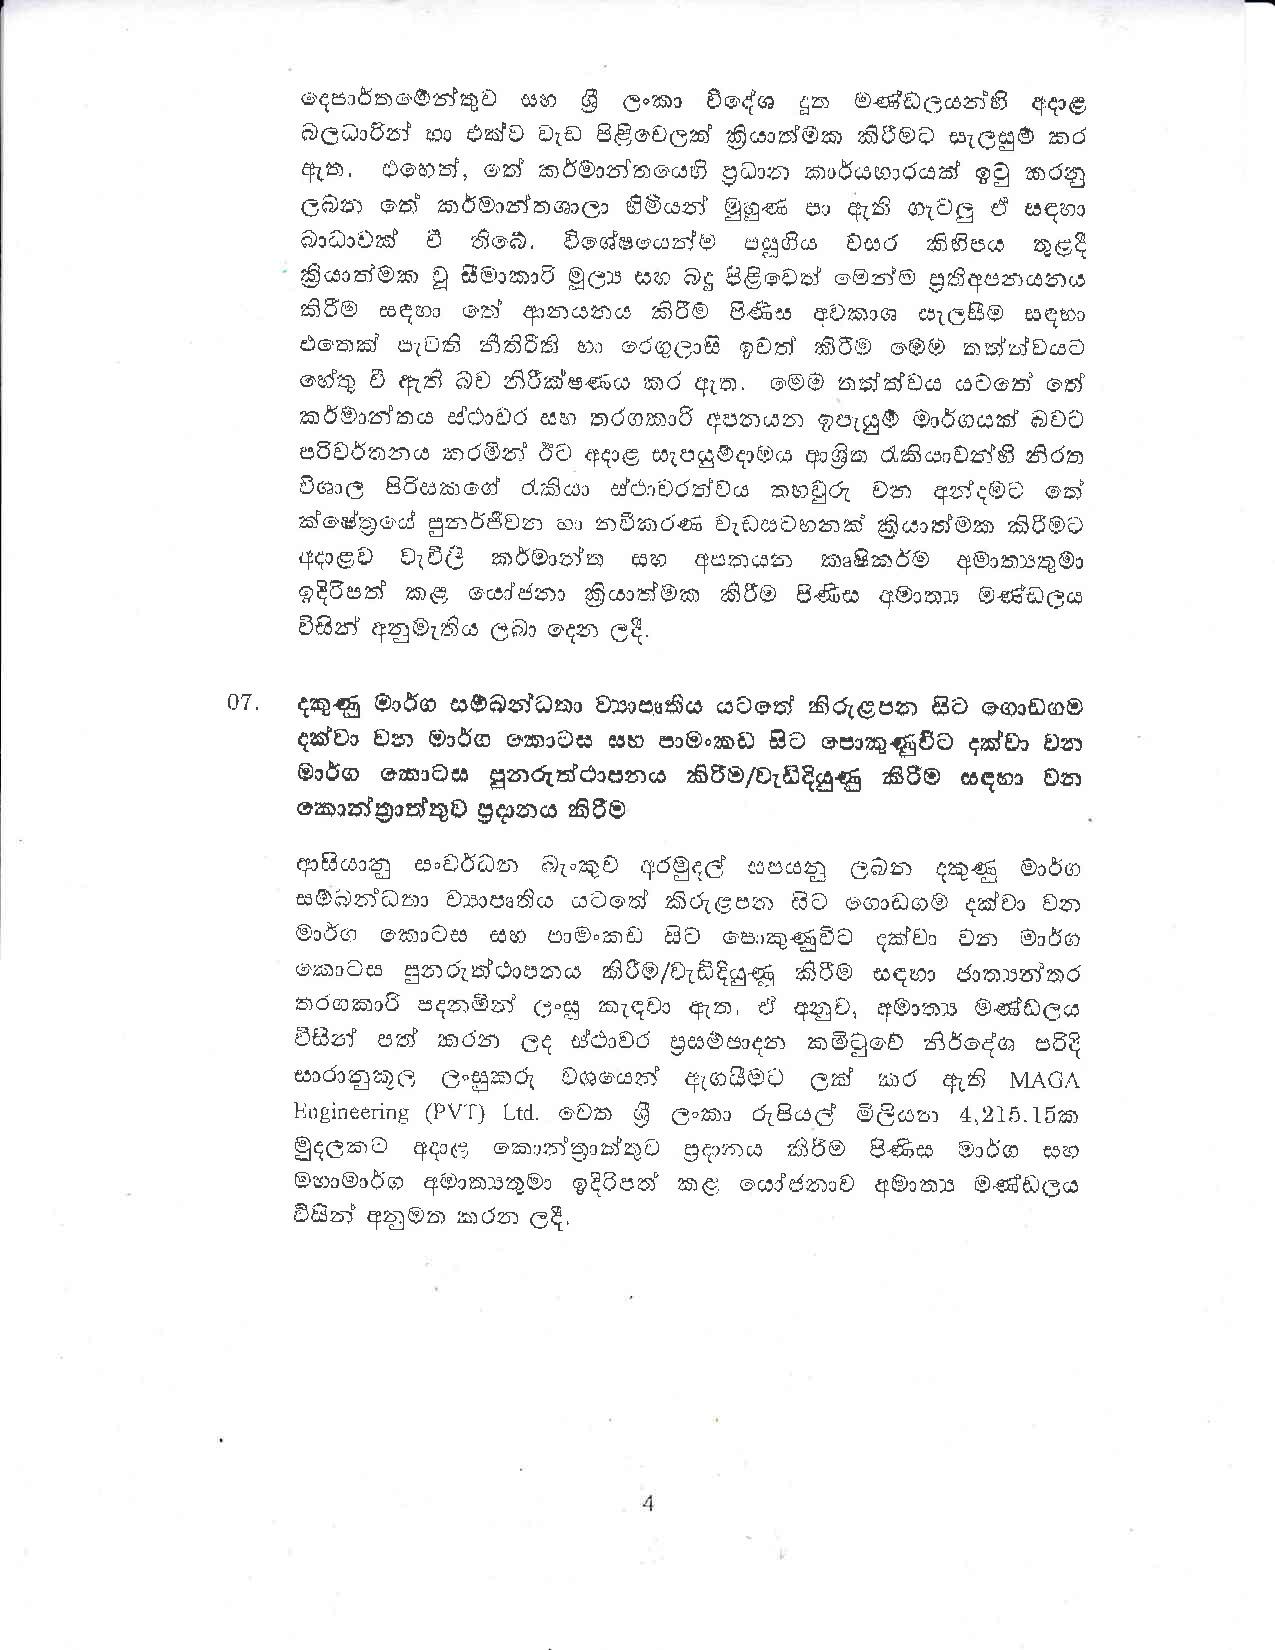 Cabinet Decision on 02.01.2020 page 004